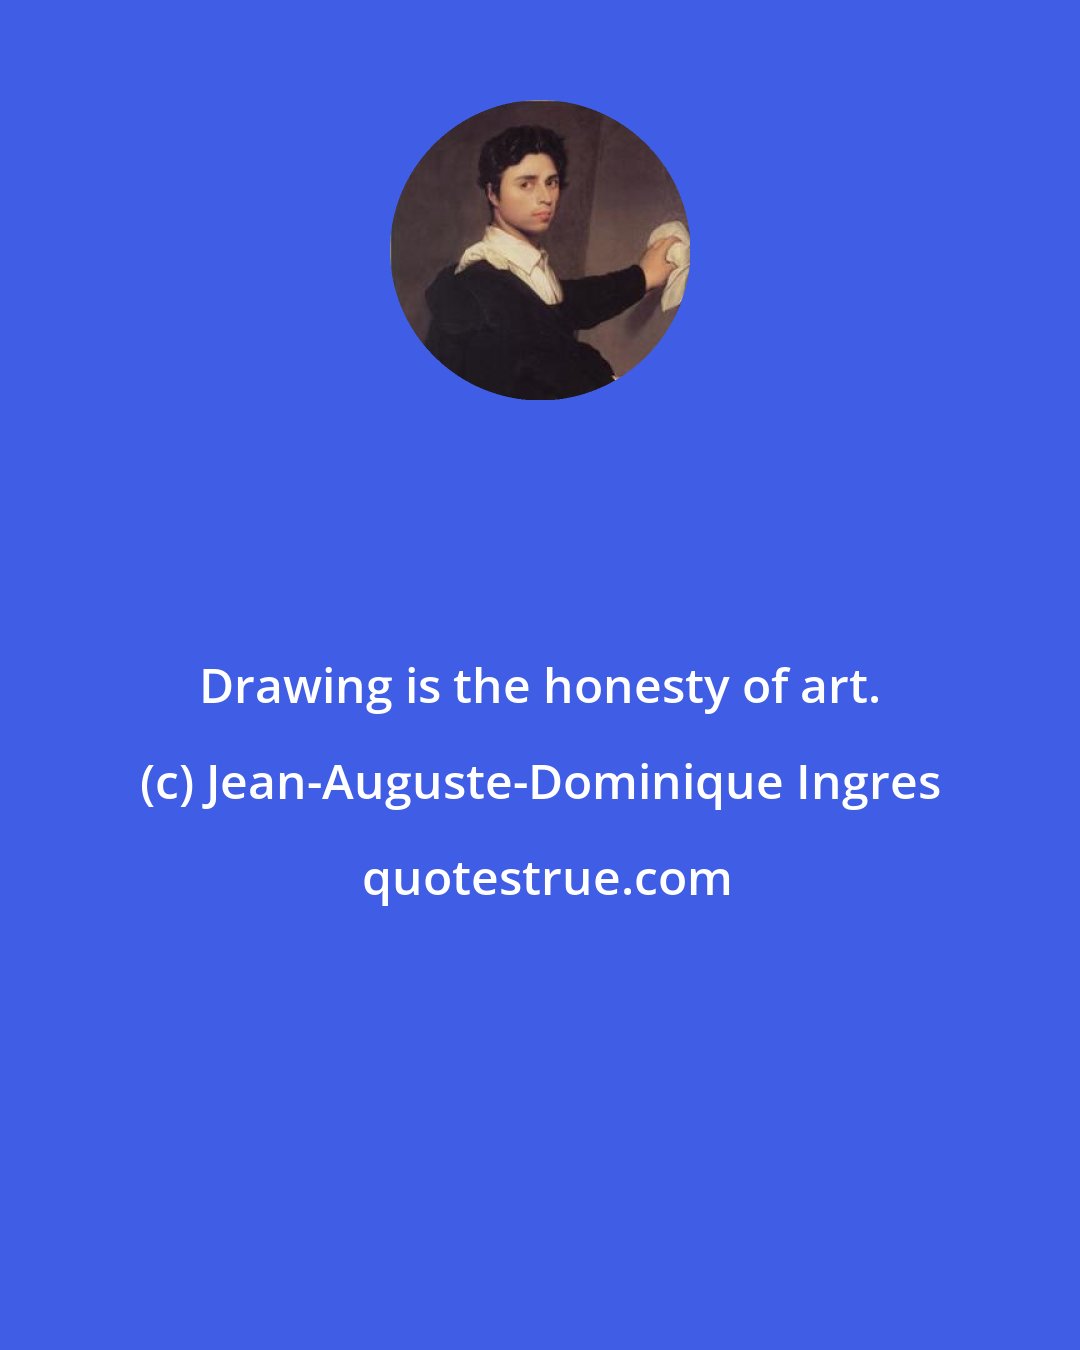 Jean-Auguste-Dominique Ingres: Drawing is the honesty of art.